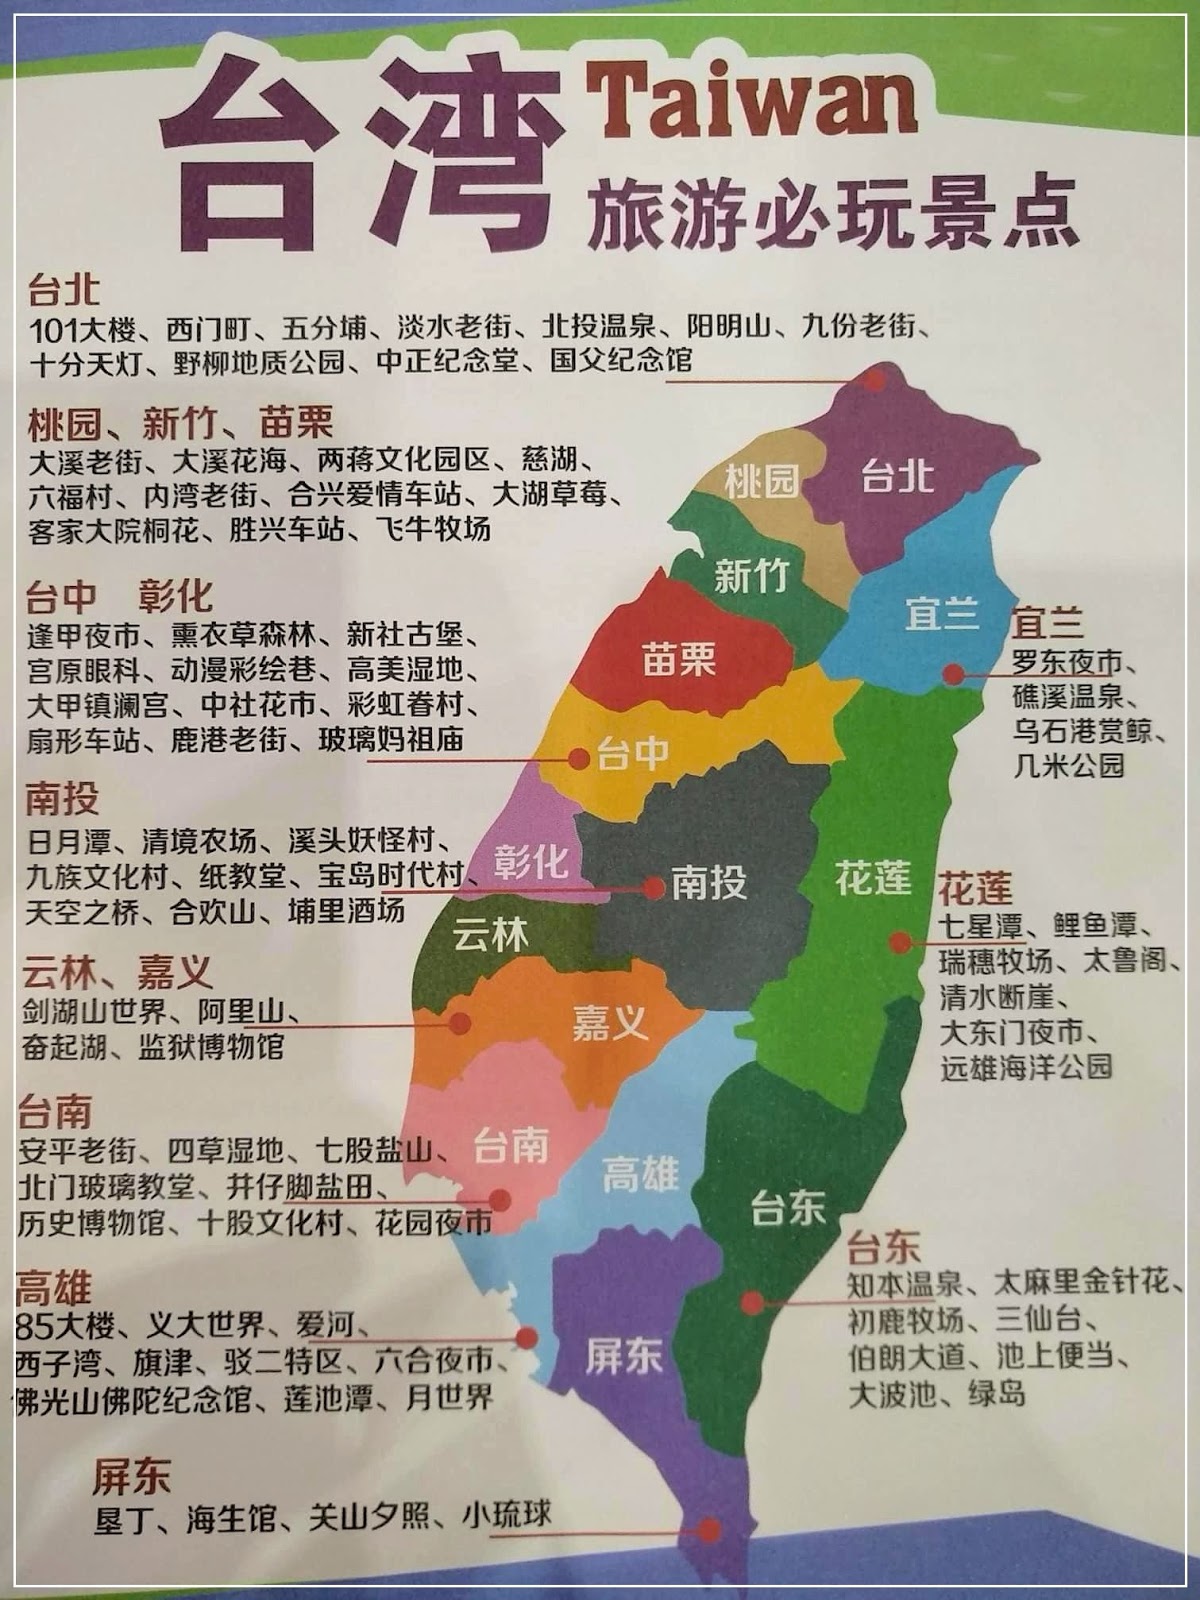 taiwan map with tourist attractions